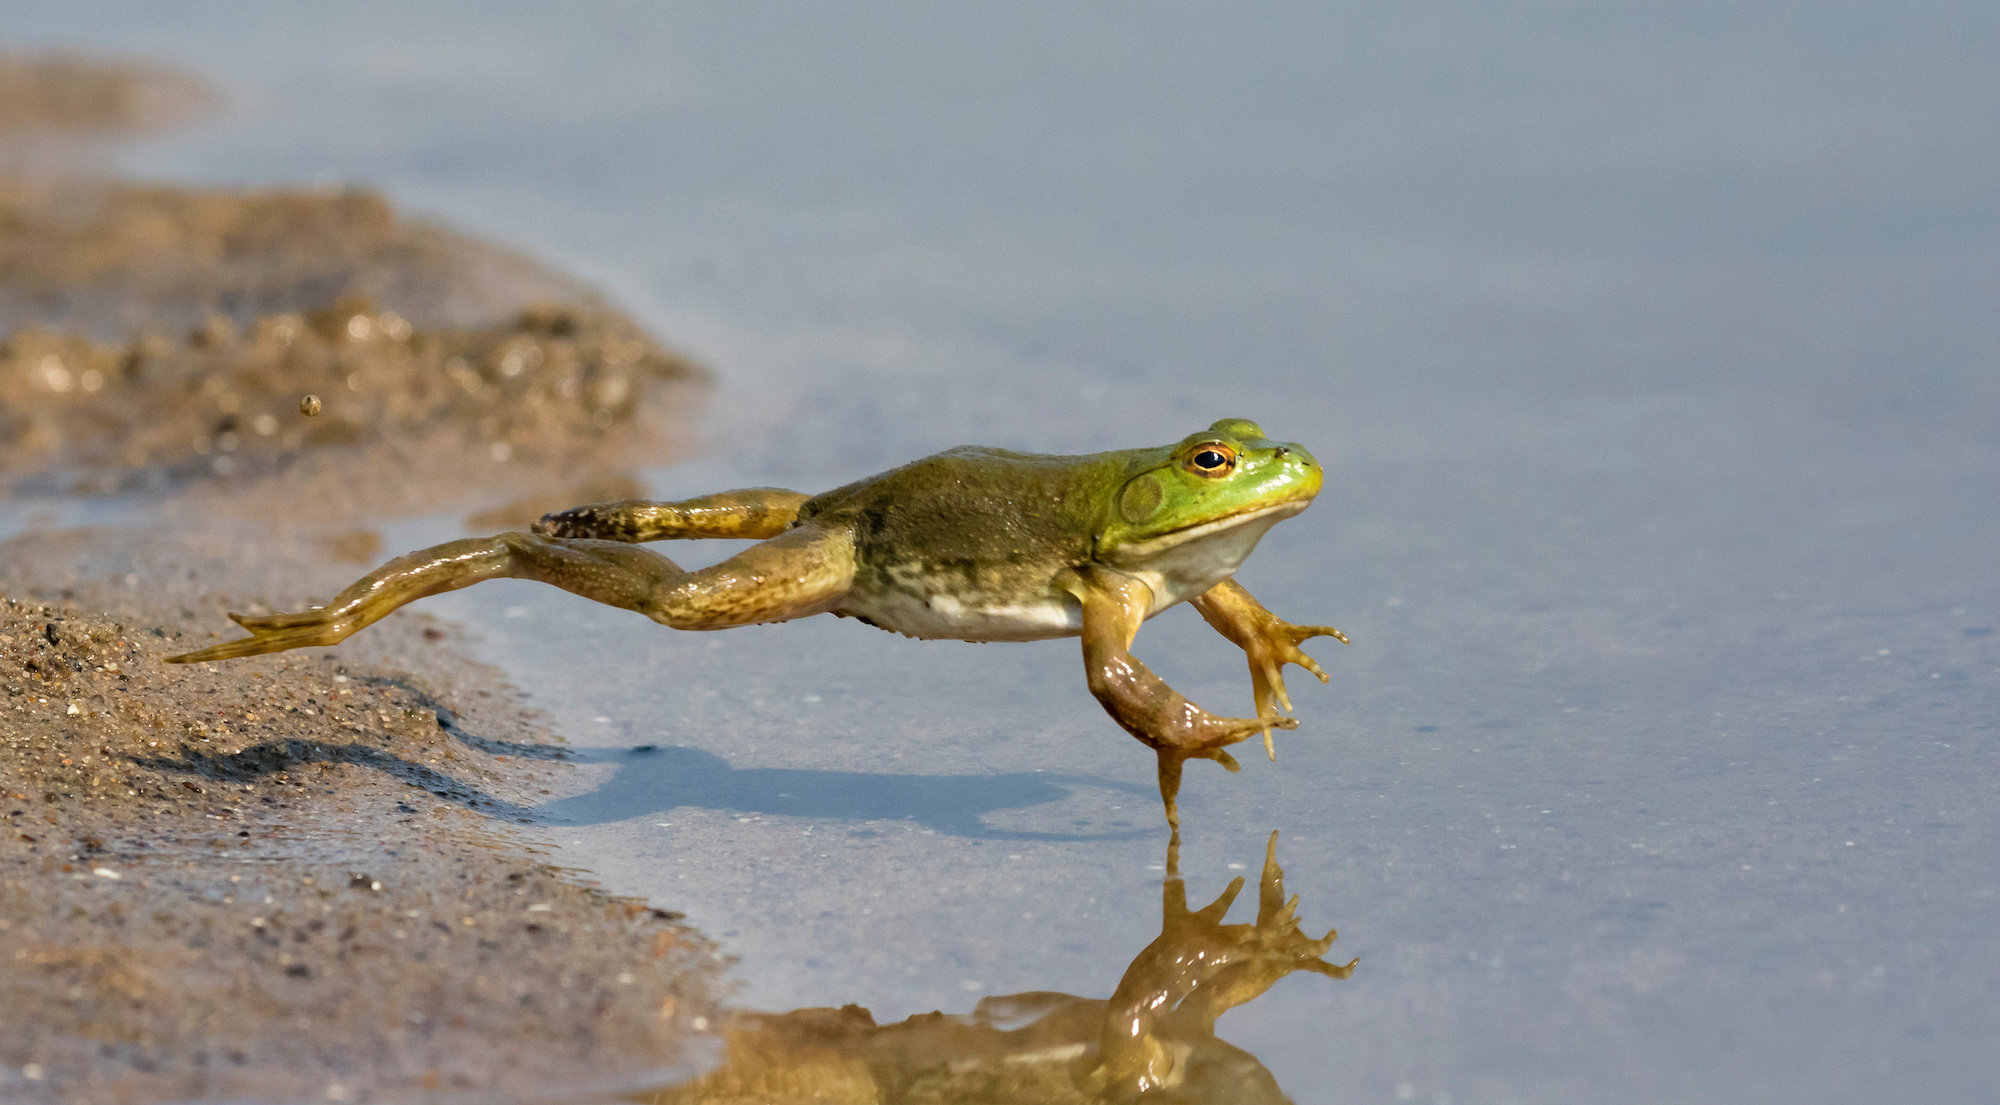 Photograph of a frog jumping into a shallow body of water.